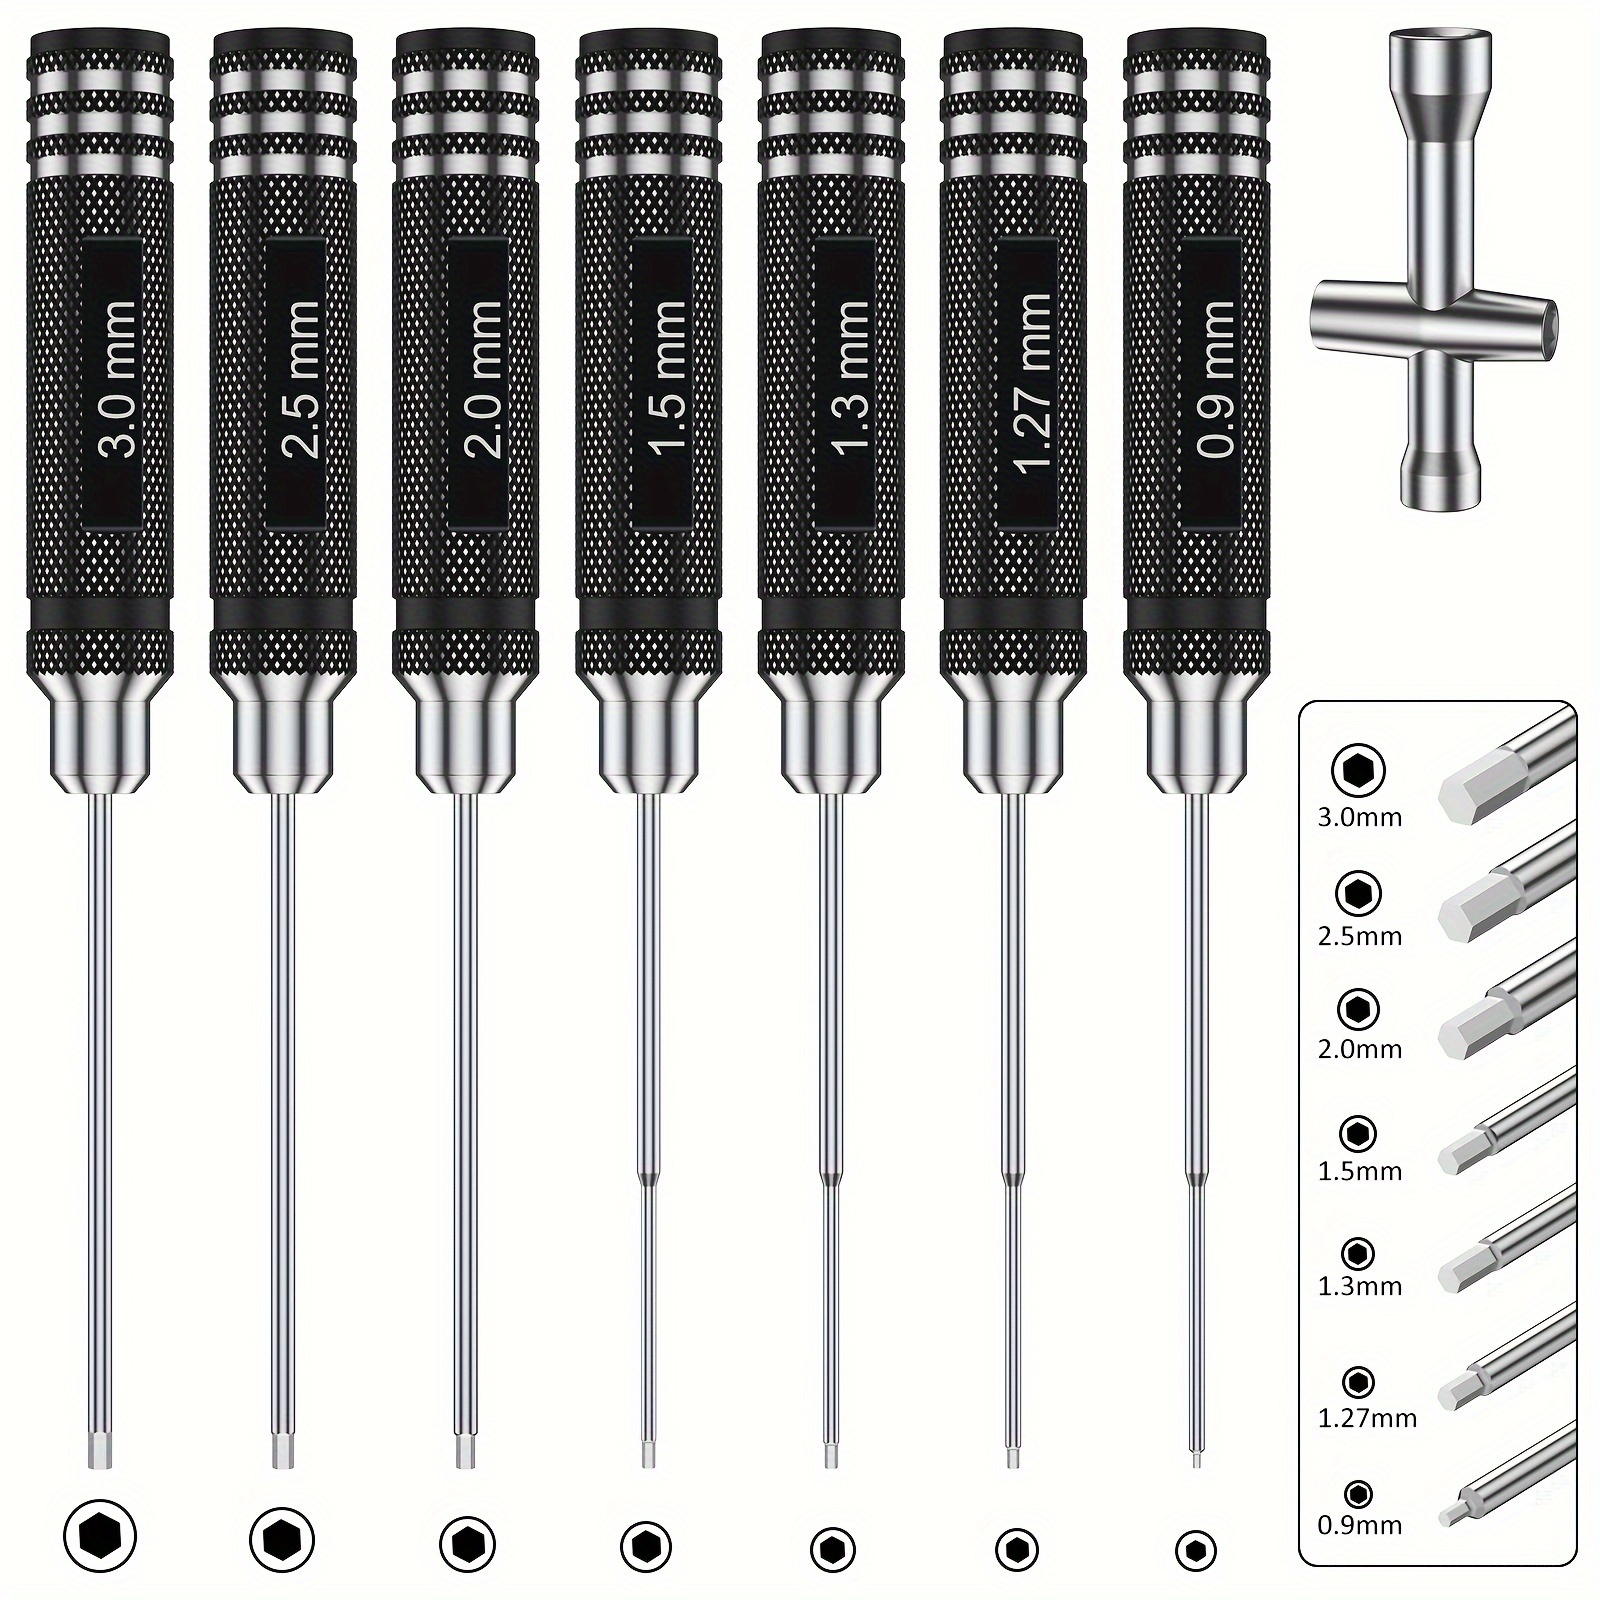 Hobbypark Mini RC Allen Wrench Set 0.9mm 1.27mm 1.5mm Hex Driver  Screwdrivers & Wheel Nut Wrench for Axial SCX24 1/24 RC Crawler Car Tools